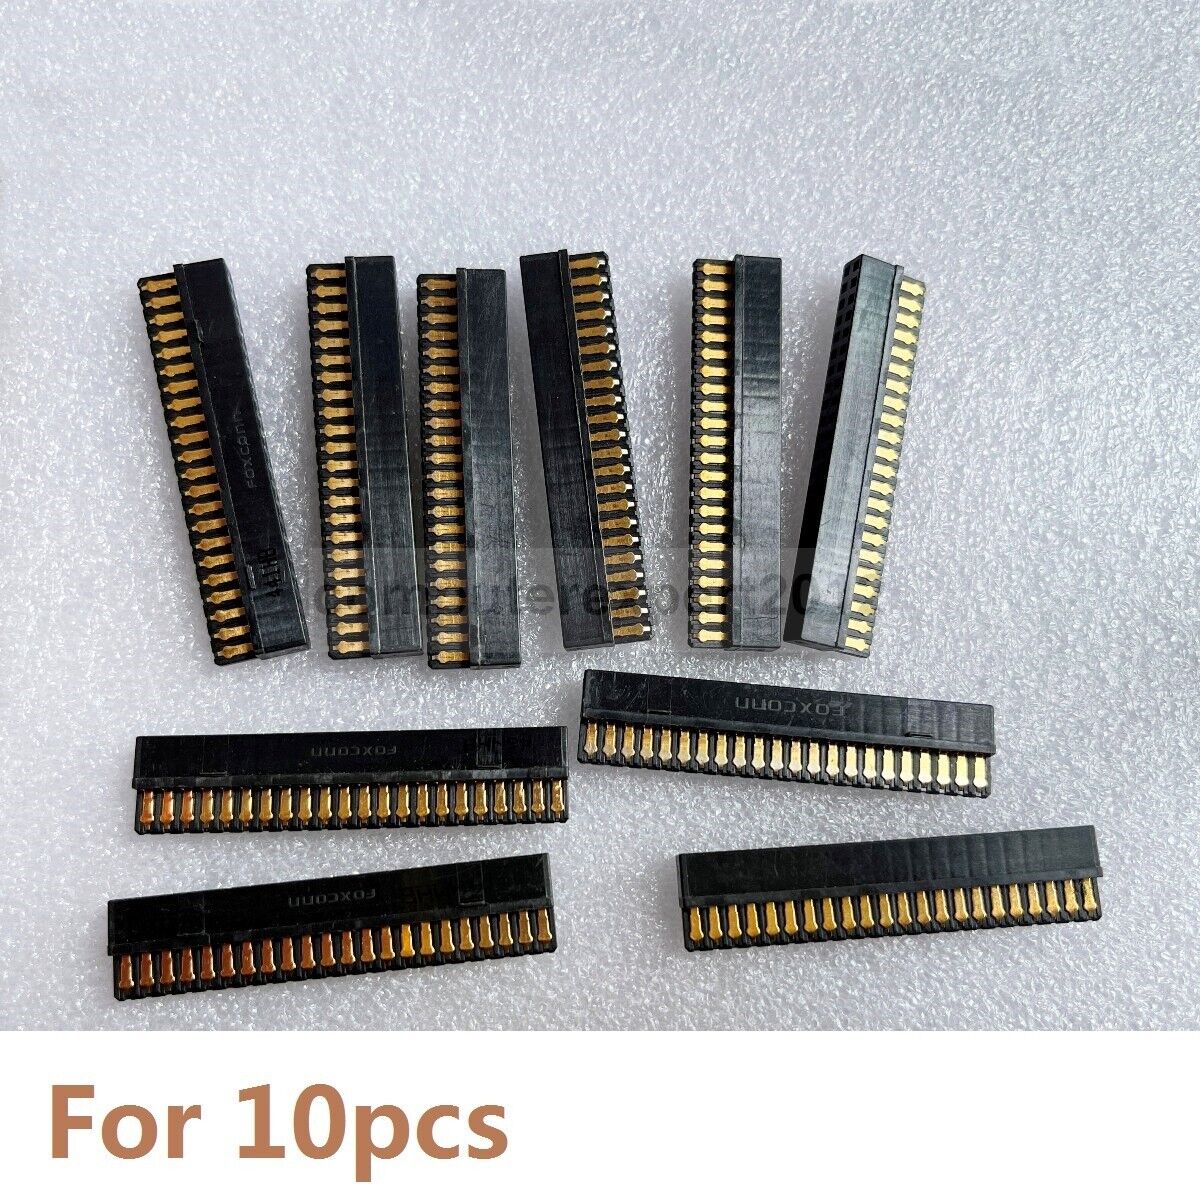 Lot 10pcs - 2.5 Inch 44pin IDE HDD Hard Drive Connector Adapter for Dell Laptops